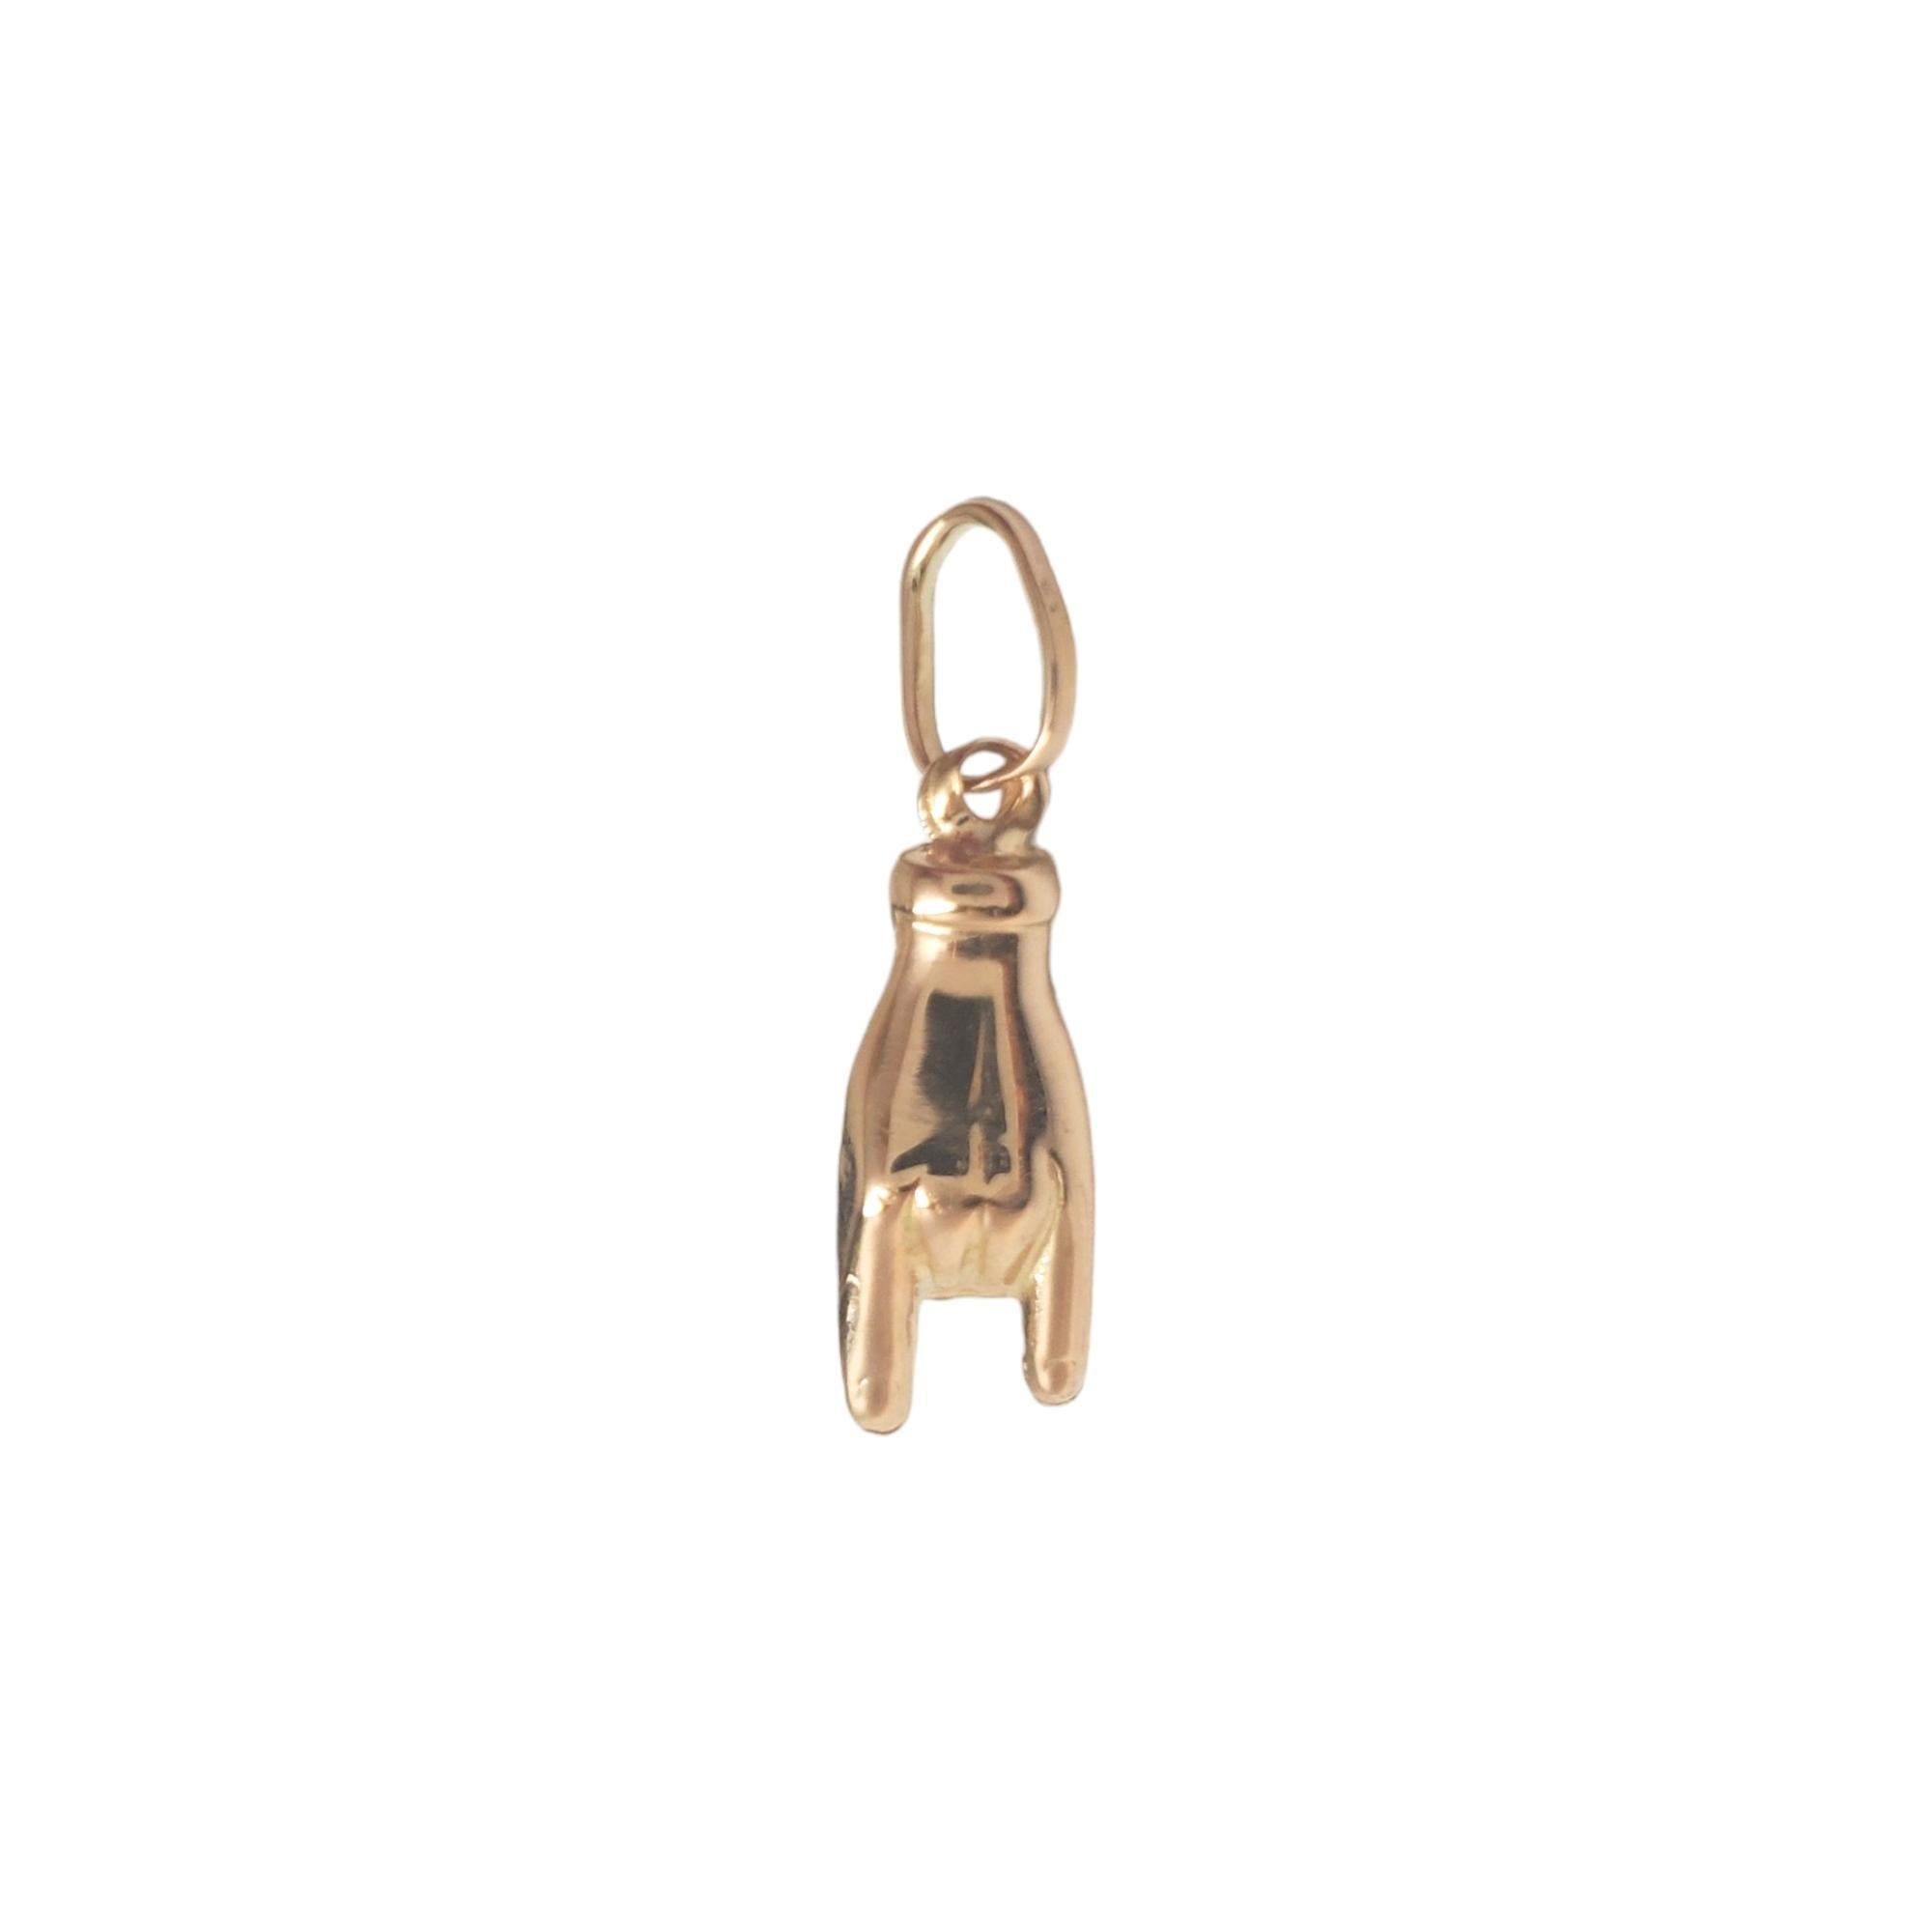 14K Yellow Gold Hang Loose Charm

Hang loose with this awesome charm in 14K yellow gold!

Hallmark: 14KT ITALY

Weight: 0.58 dwt./ 0.90 g

Length w/ bail: 23.1 mm 

Size: 6.62 mm X 6.48 mm X 4.93 mm

Very good condition, professionally